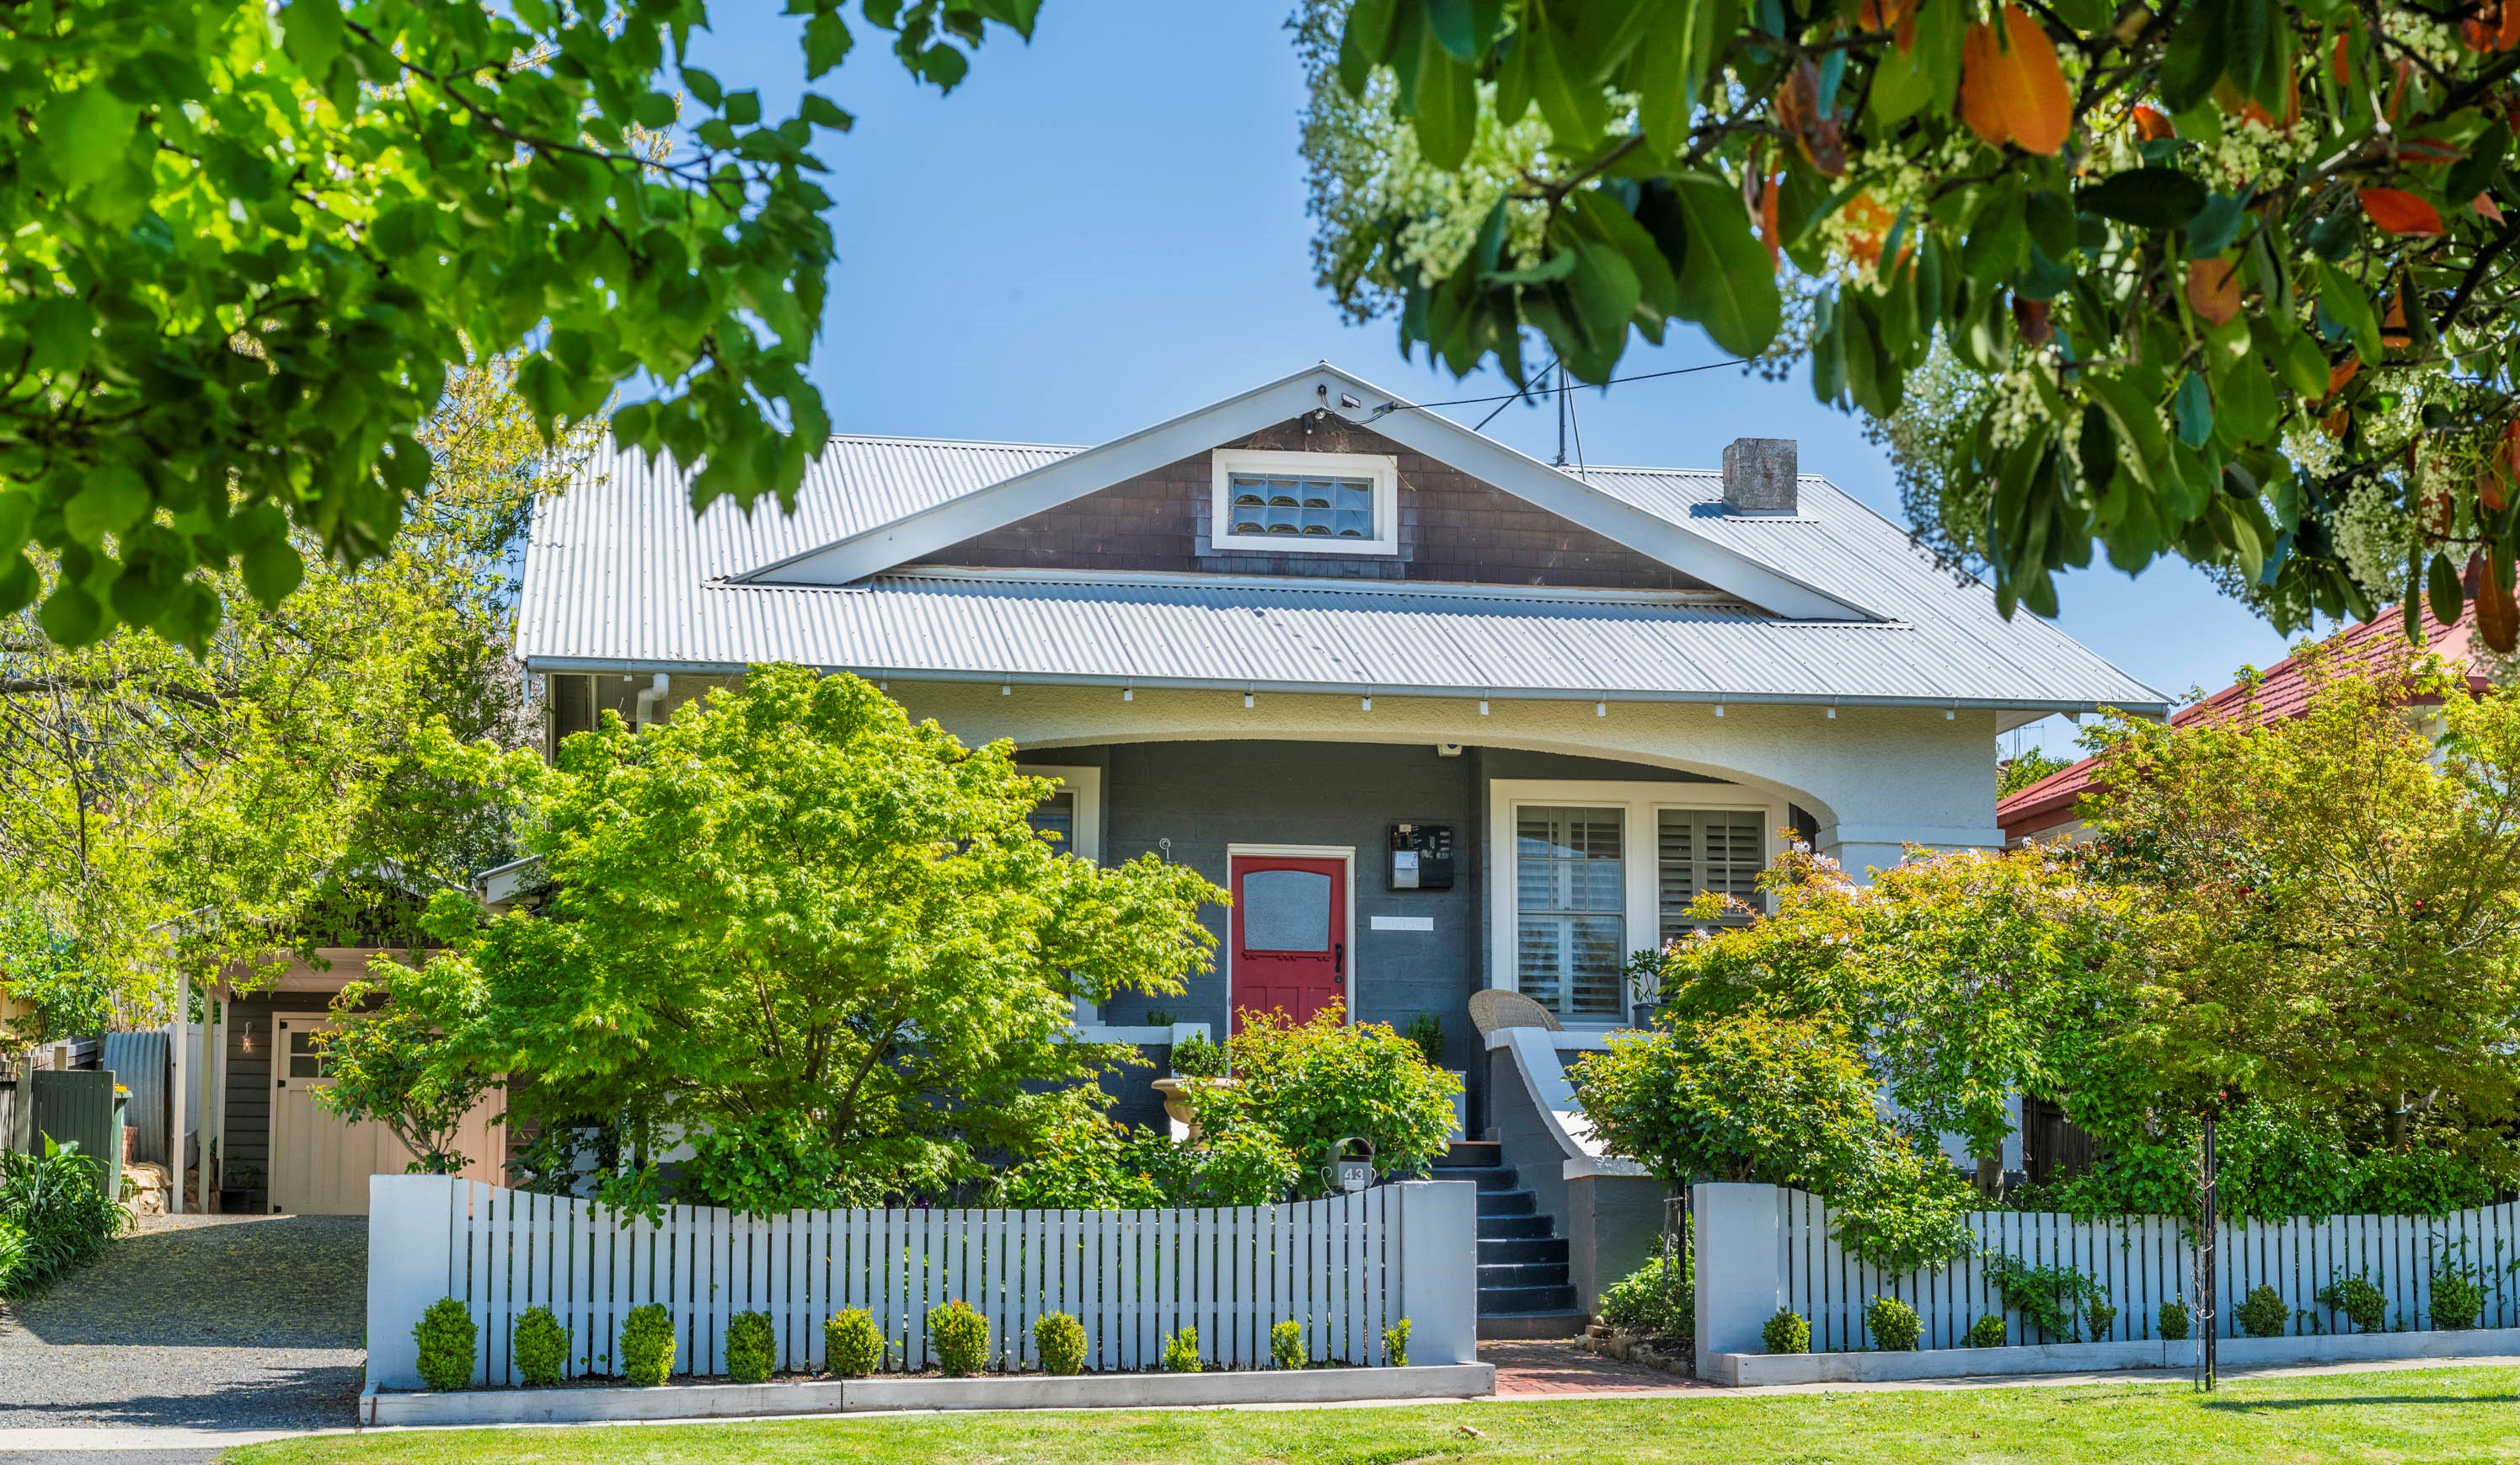 Exquisitely renovated, perfectly updated Californian bungalow in Queanbeyan